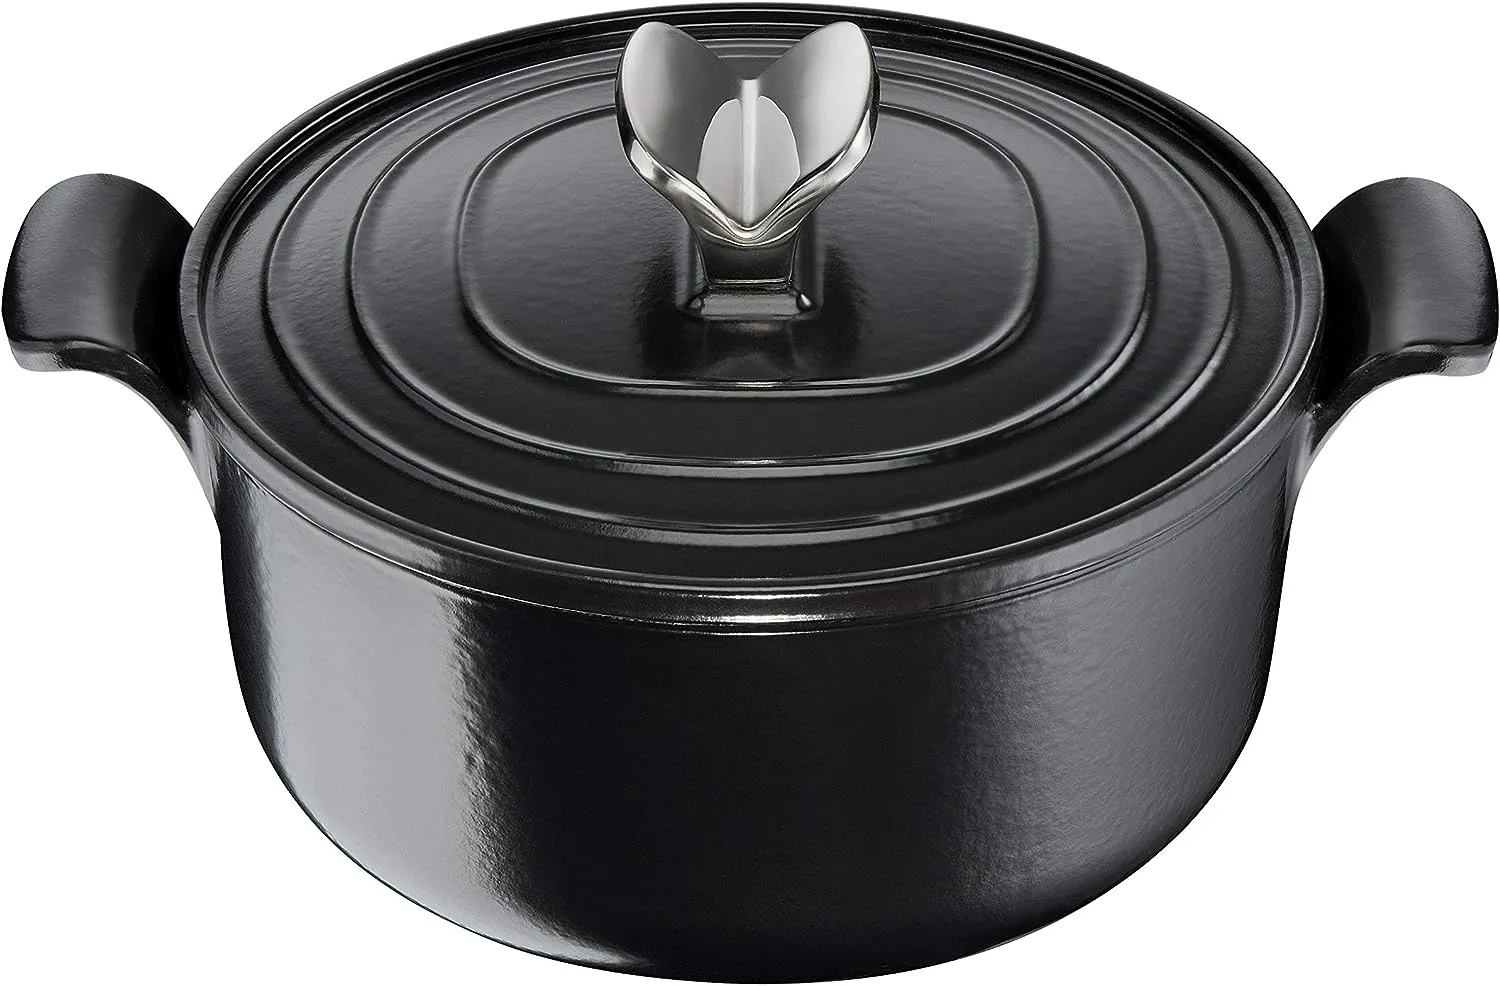 Lagostina Tradition Cocotte in Enamelled Cast Iron 18 cm